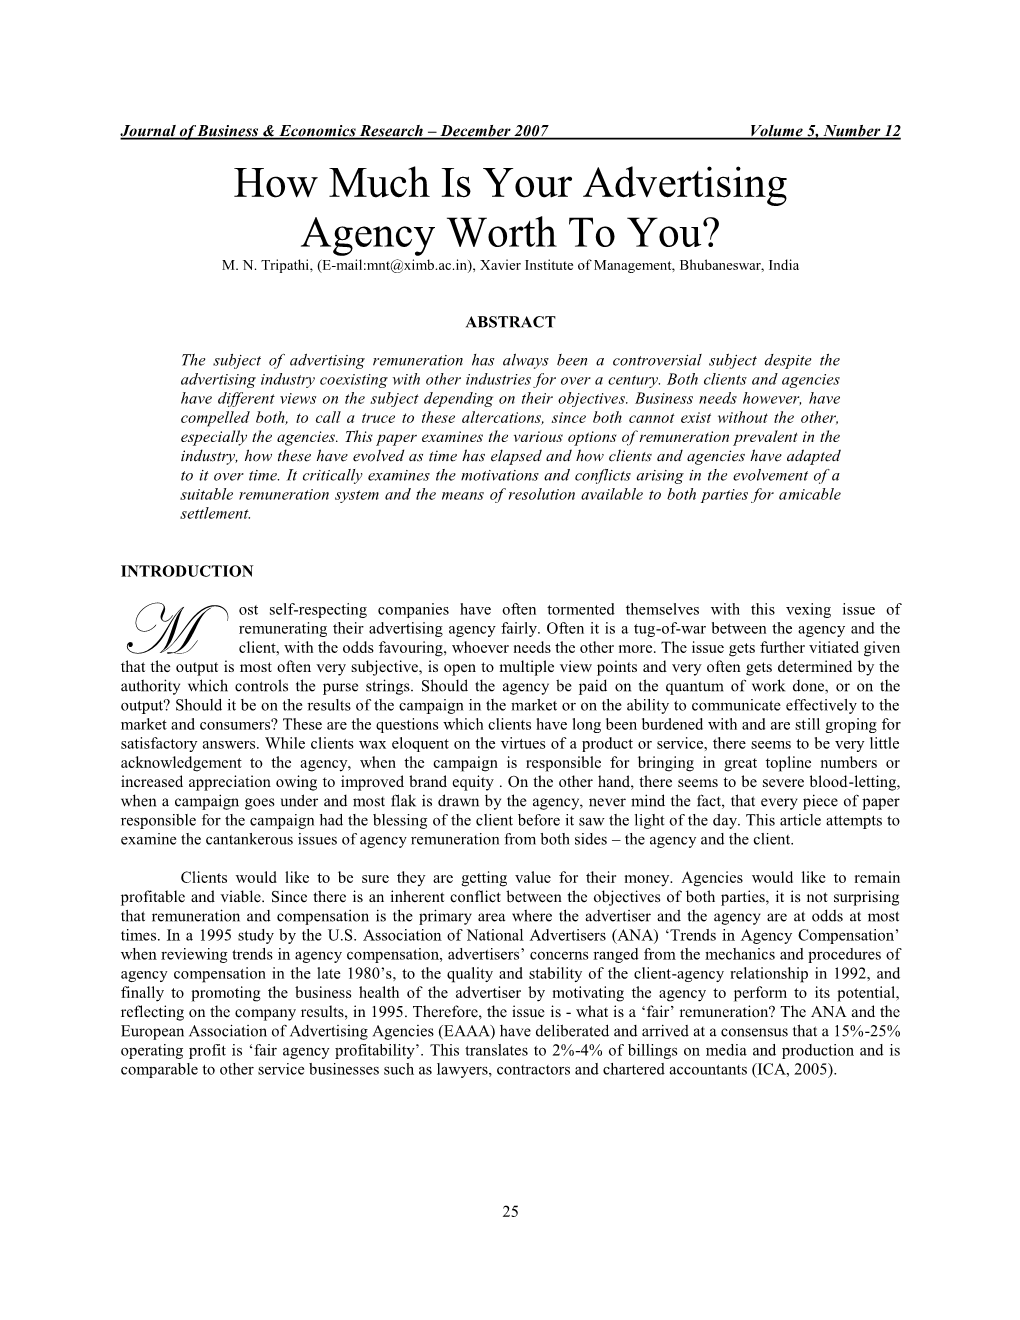 How Much Is Your Advertising Agency Worth to You? M